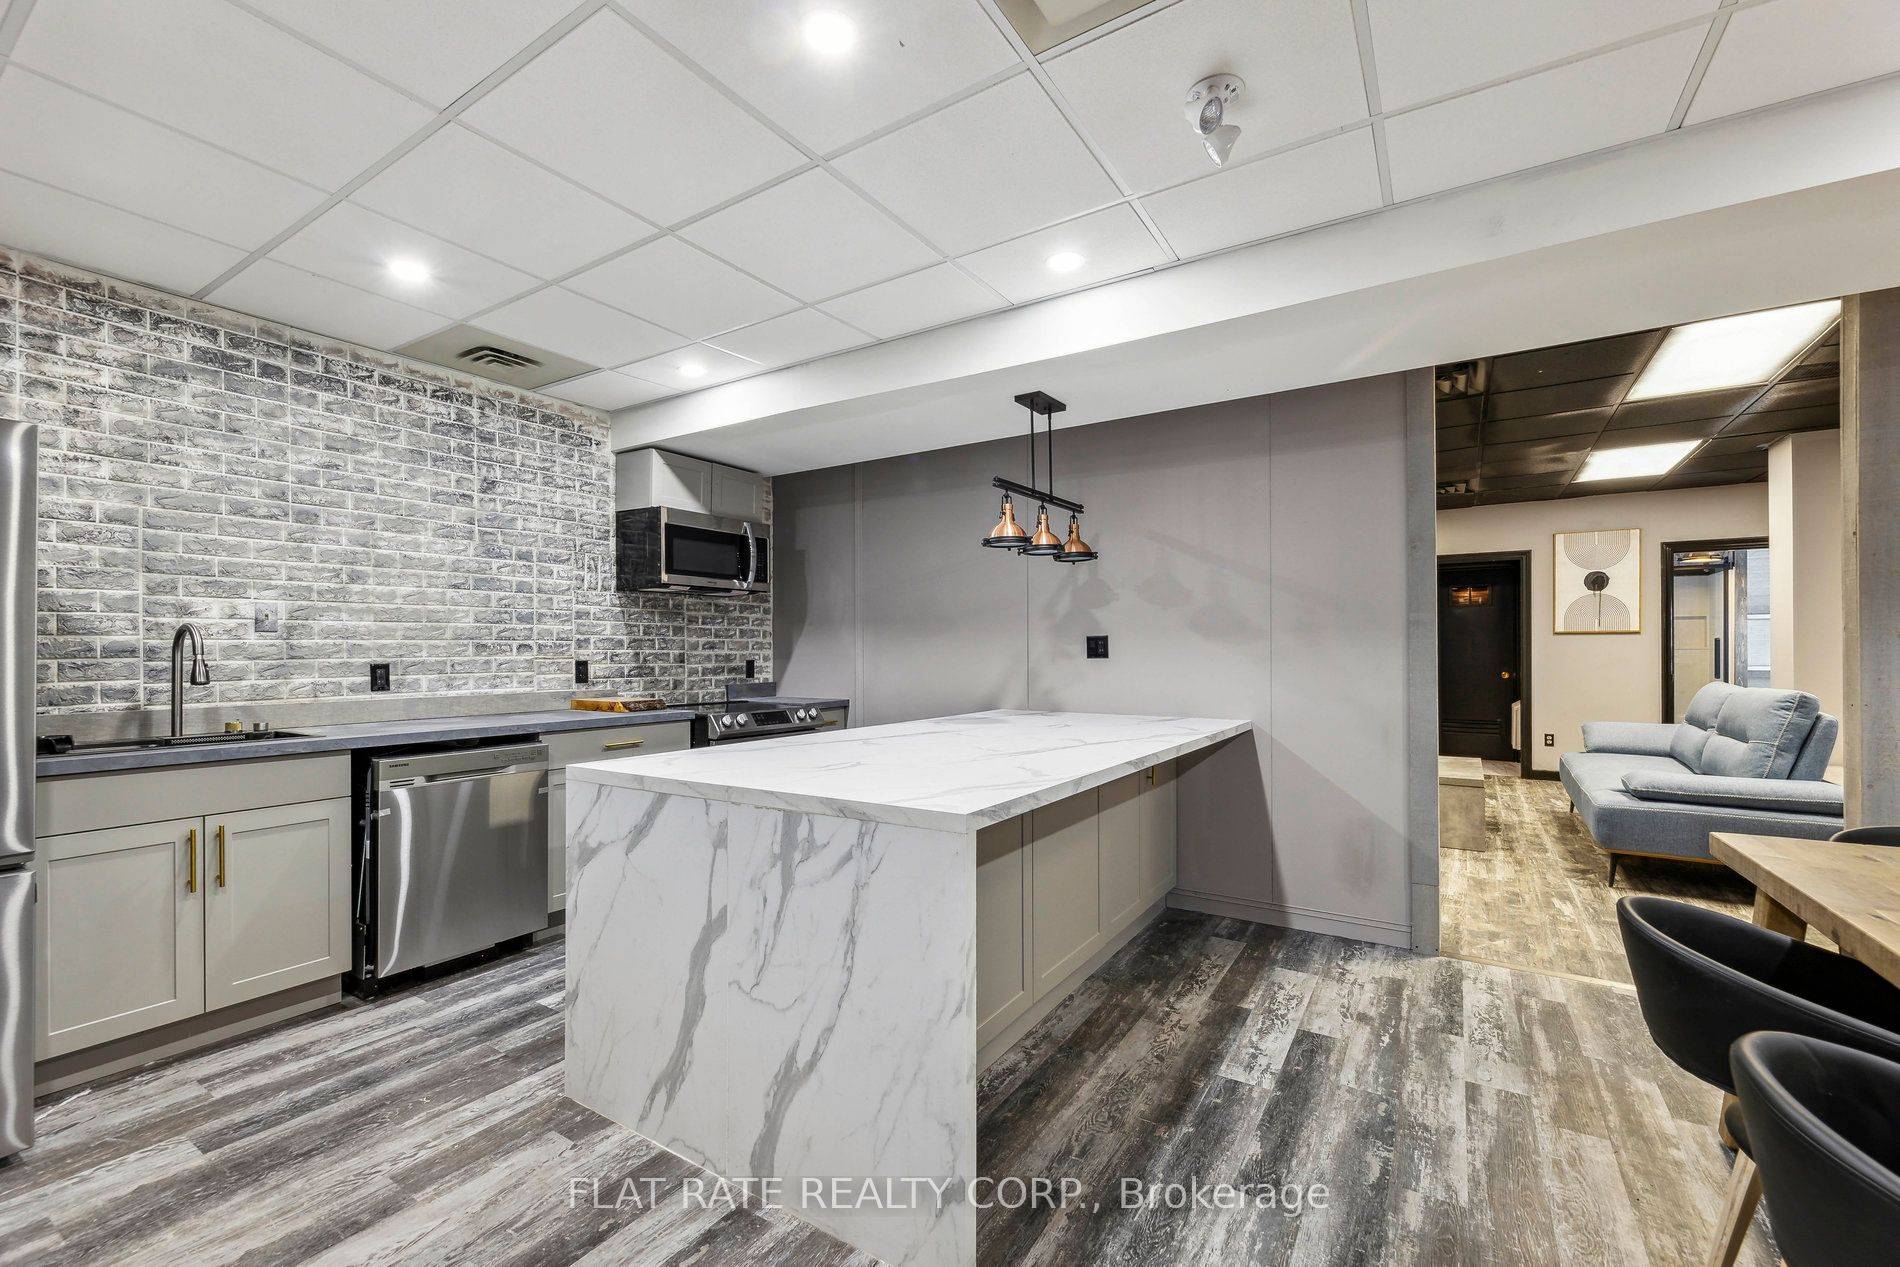 Enjoy luxury living in this 2000 sq ft loft style living space in the heart of downtown.